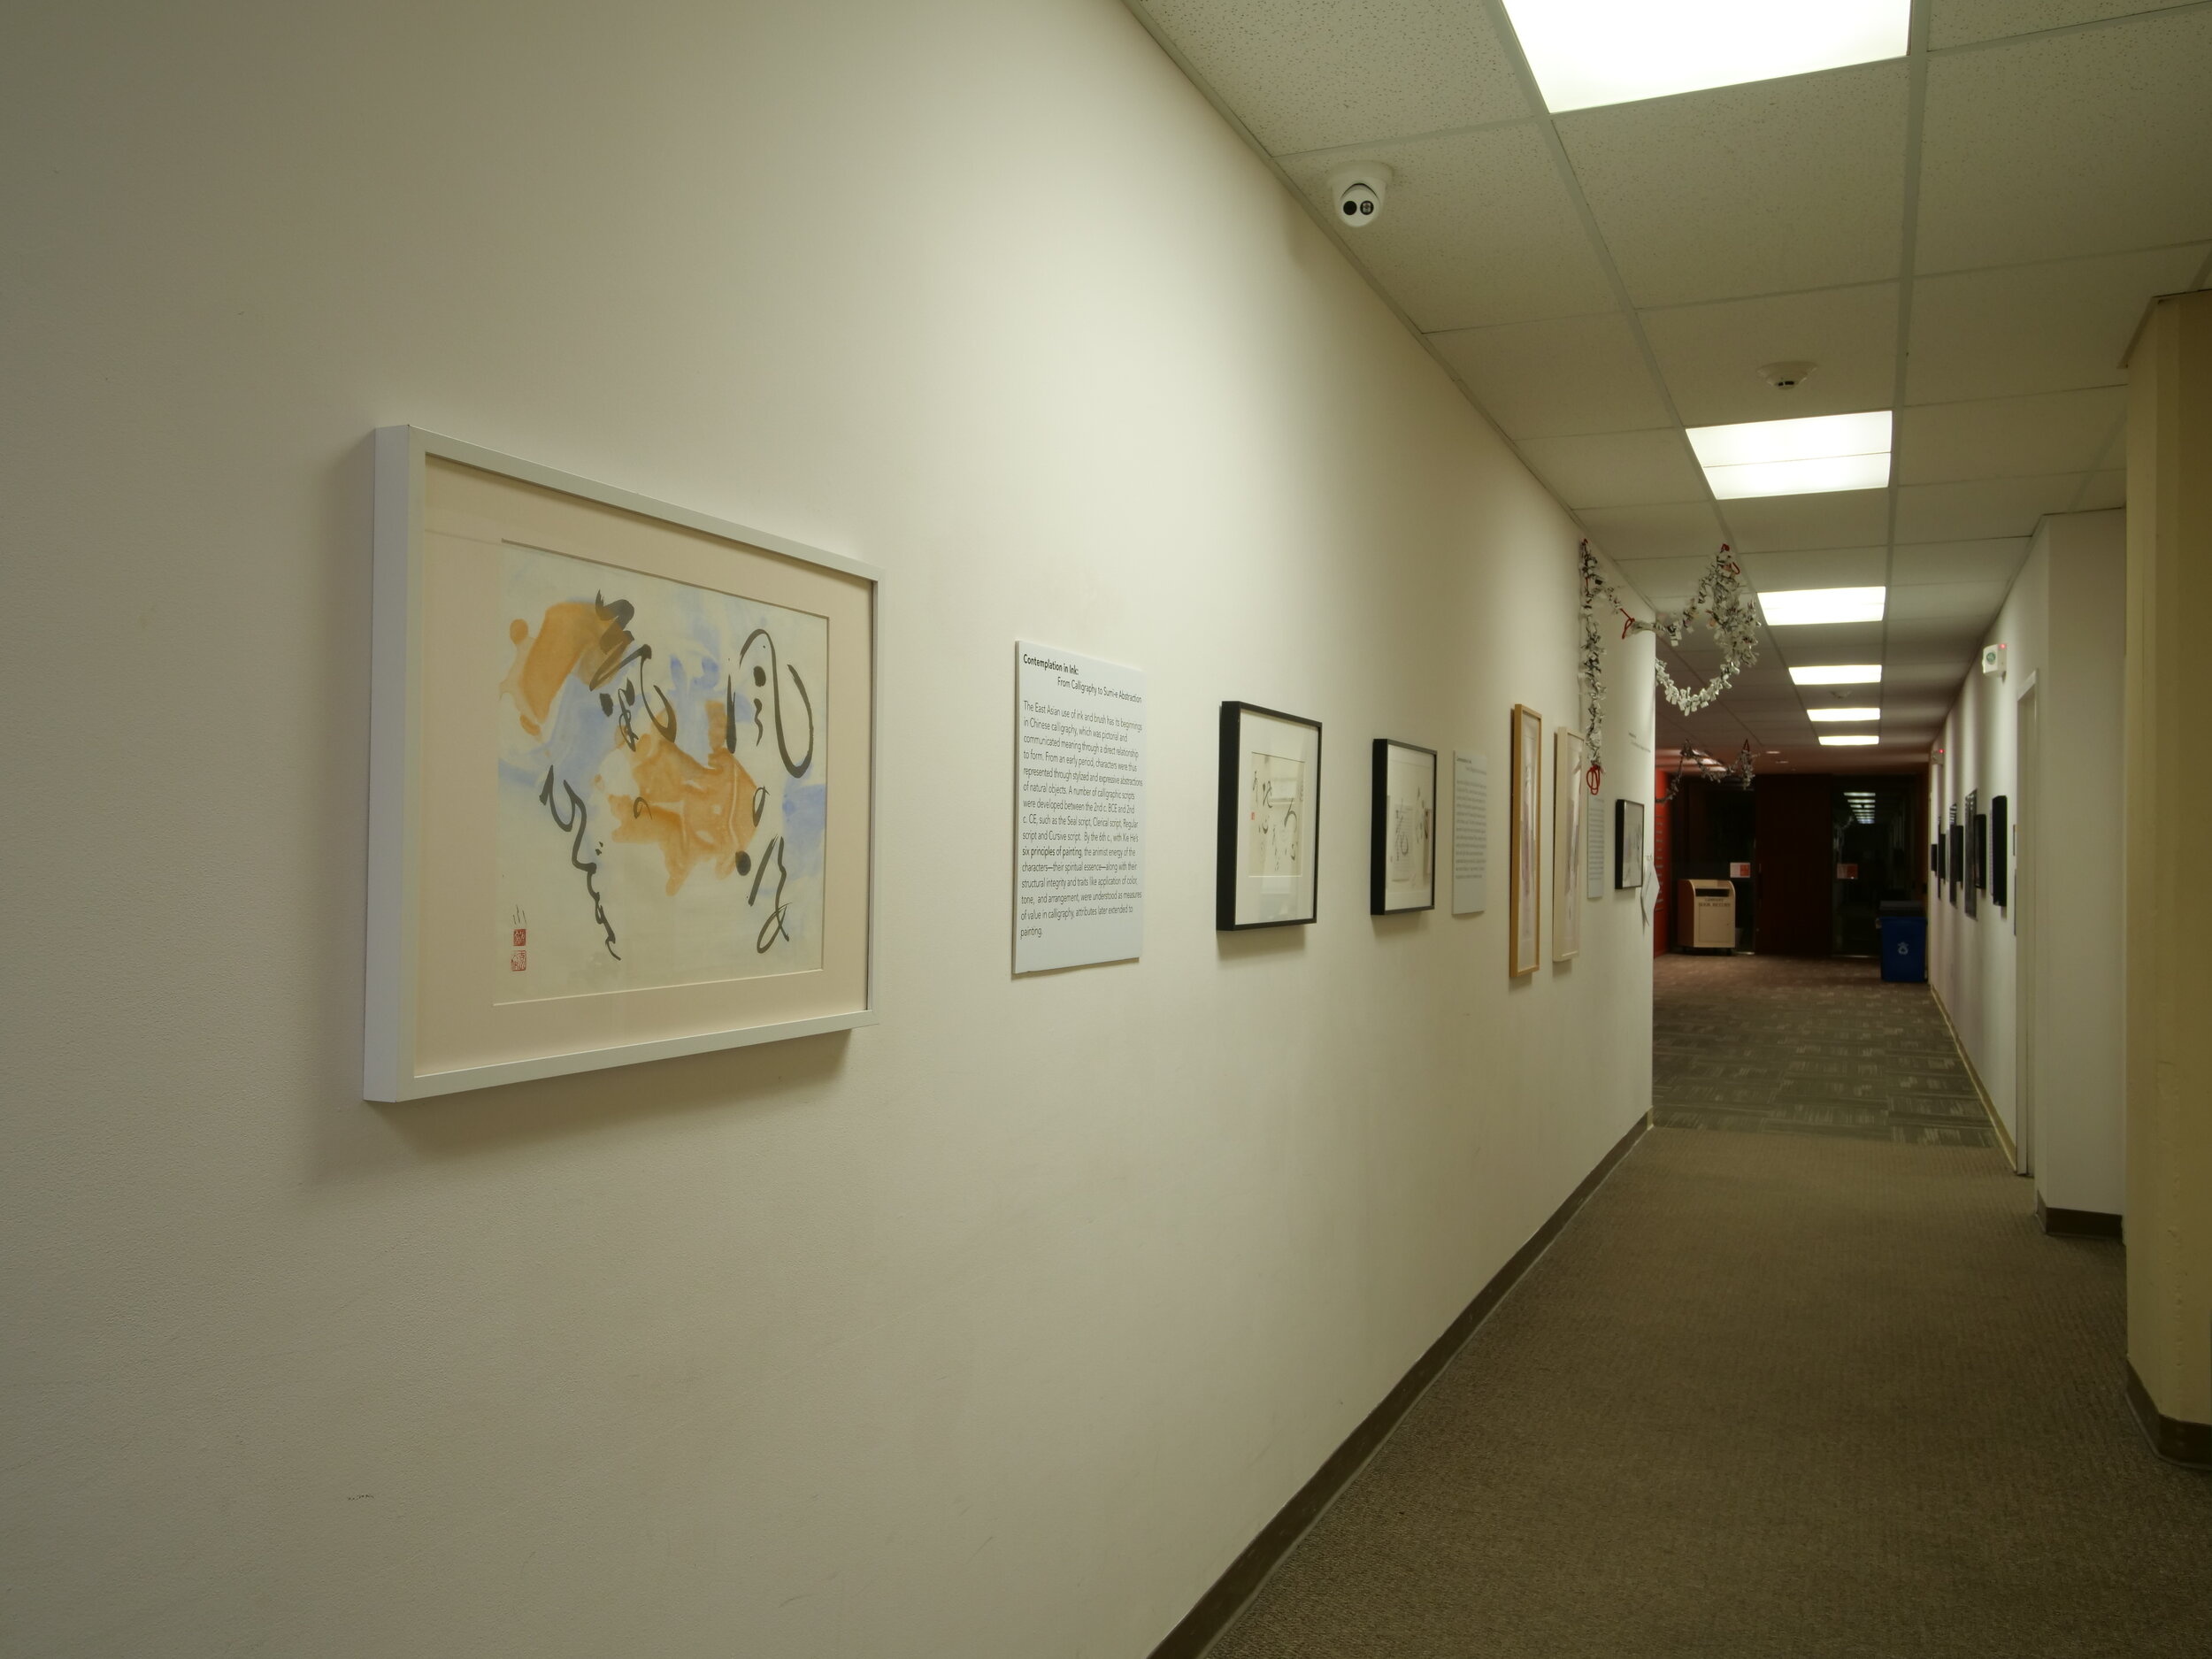 View along a wall featuring multiple framed ink drawings.